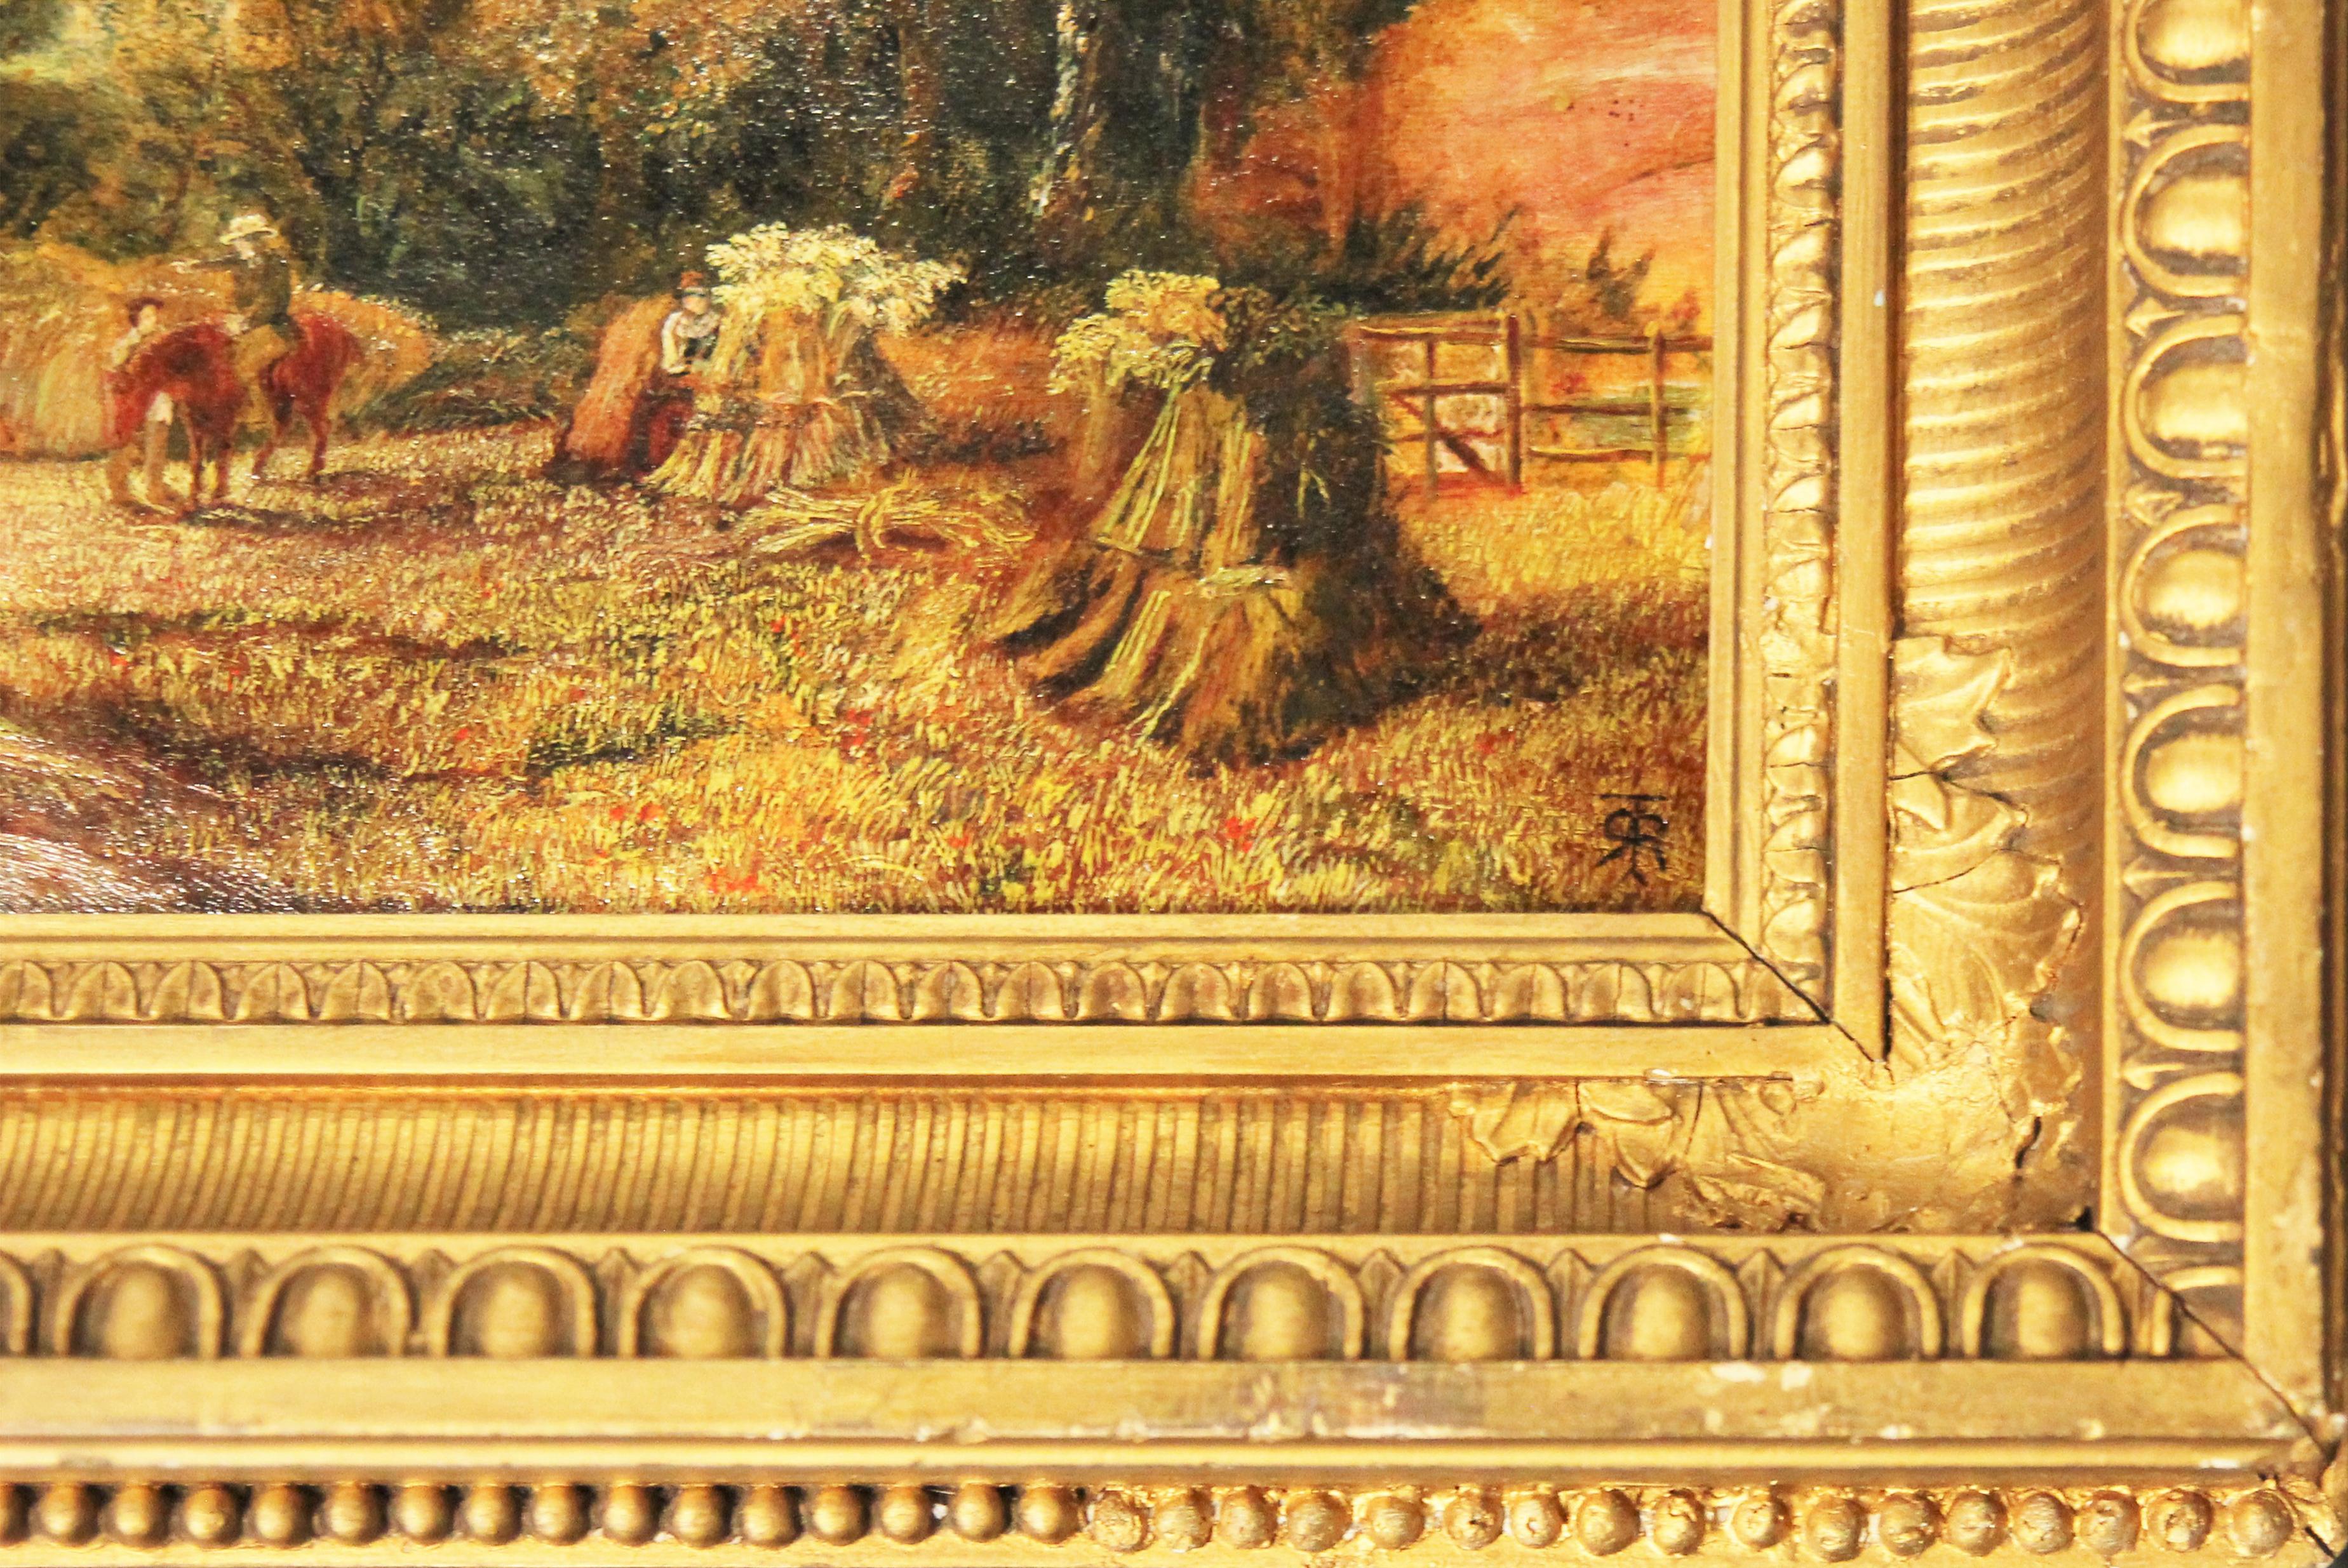 Naturalistic Wheat Harvest Landscape Painting of Gleaners in a Field 2